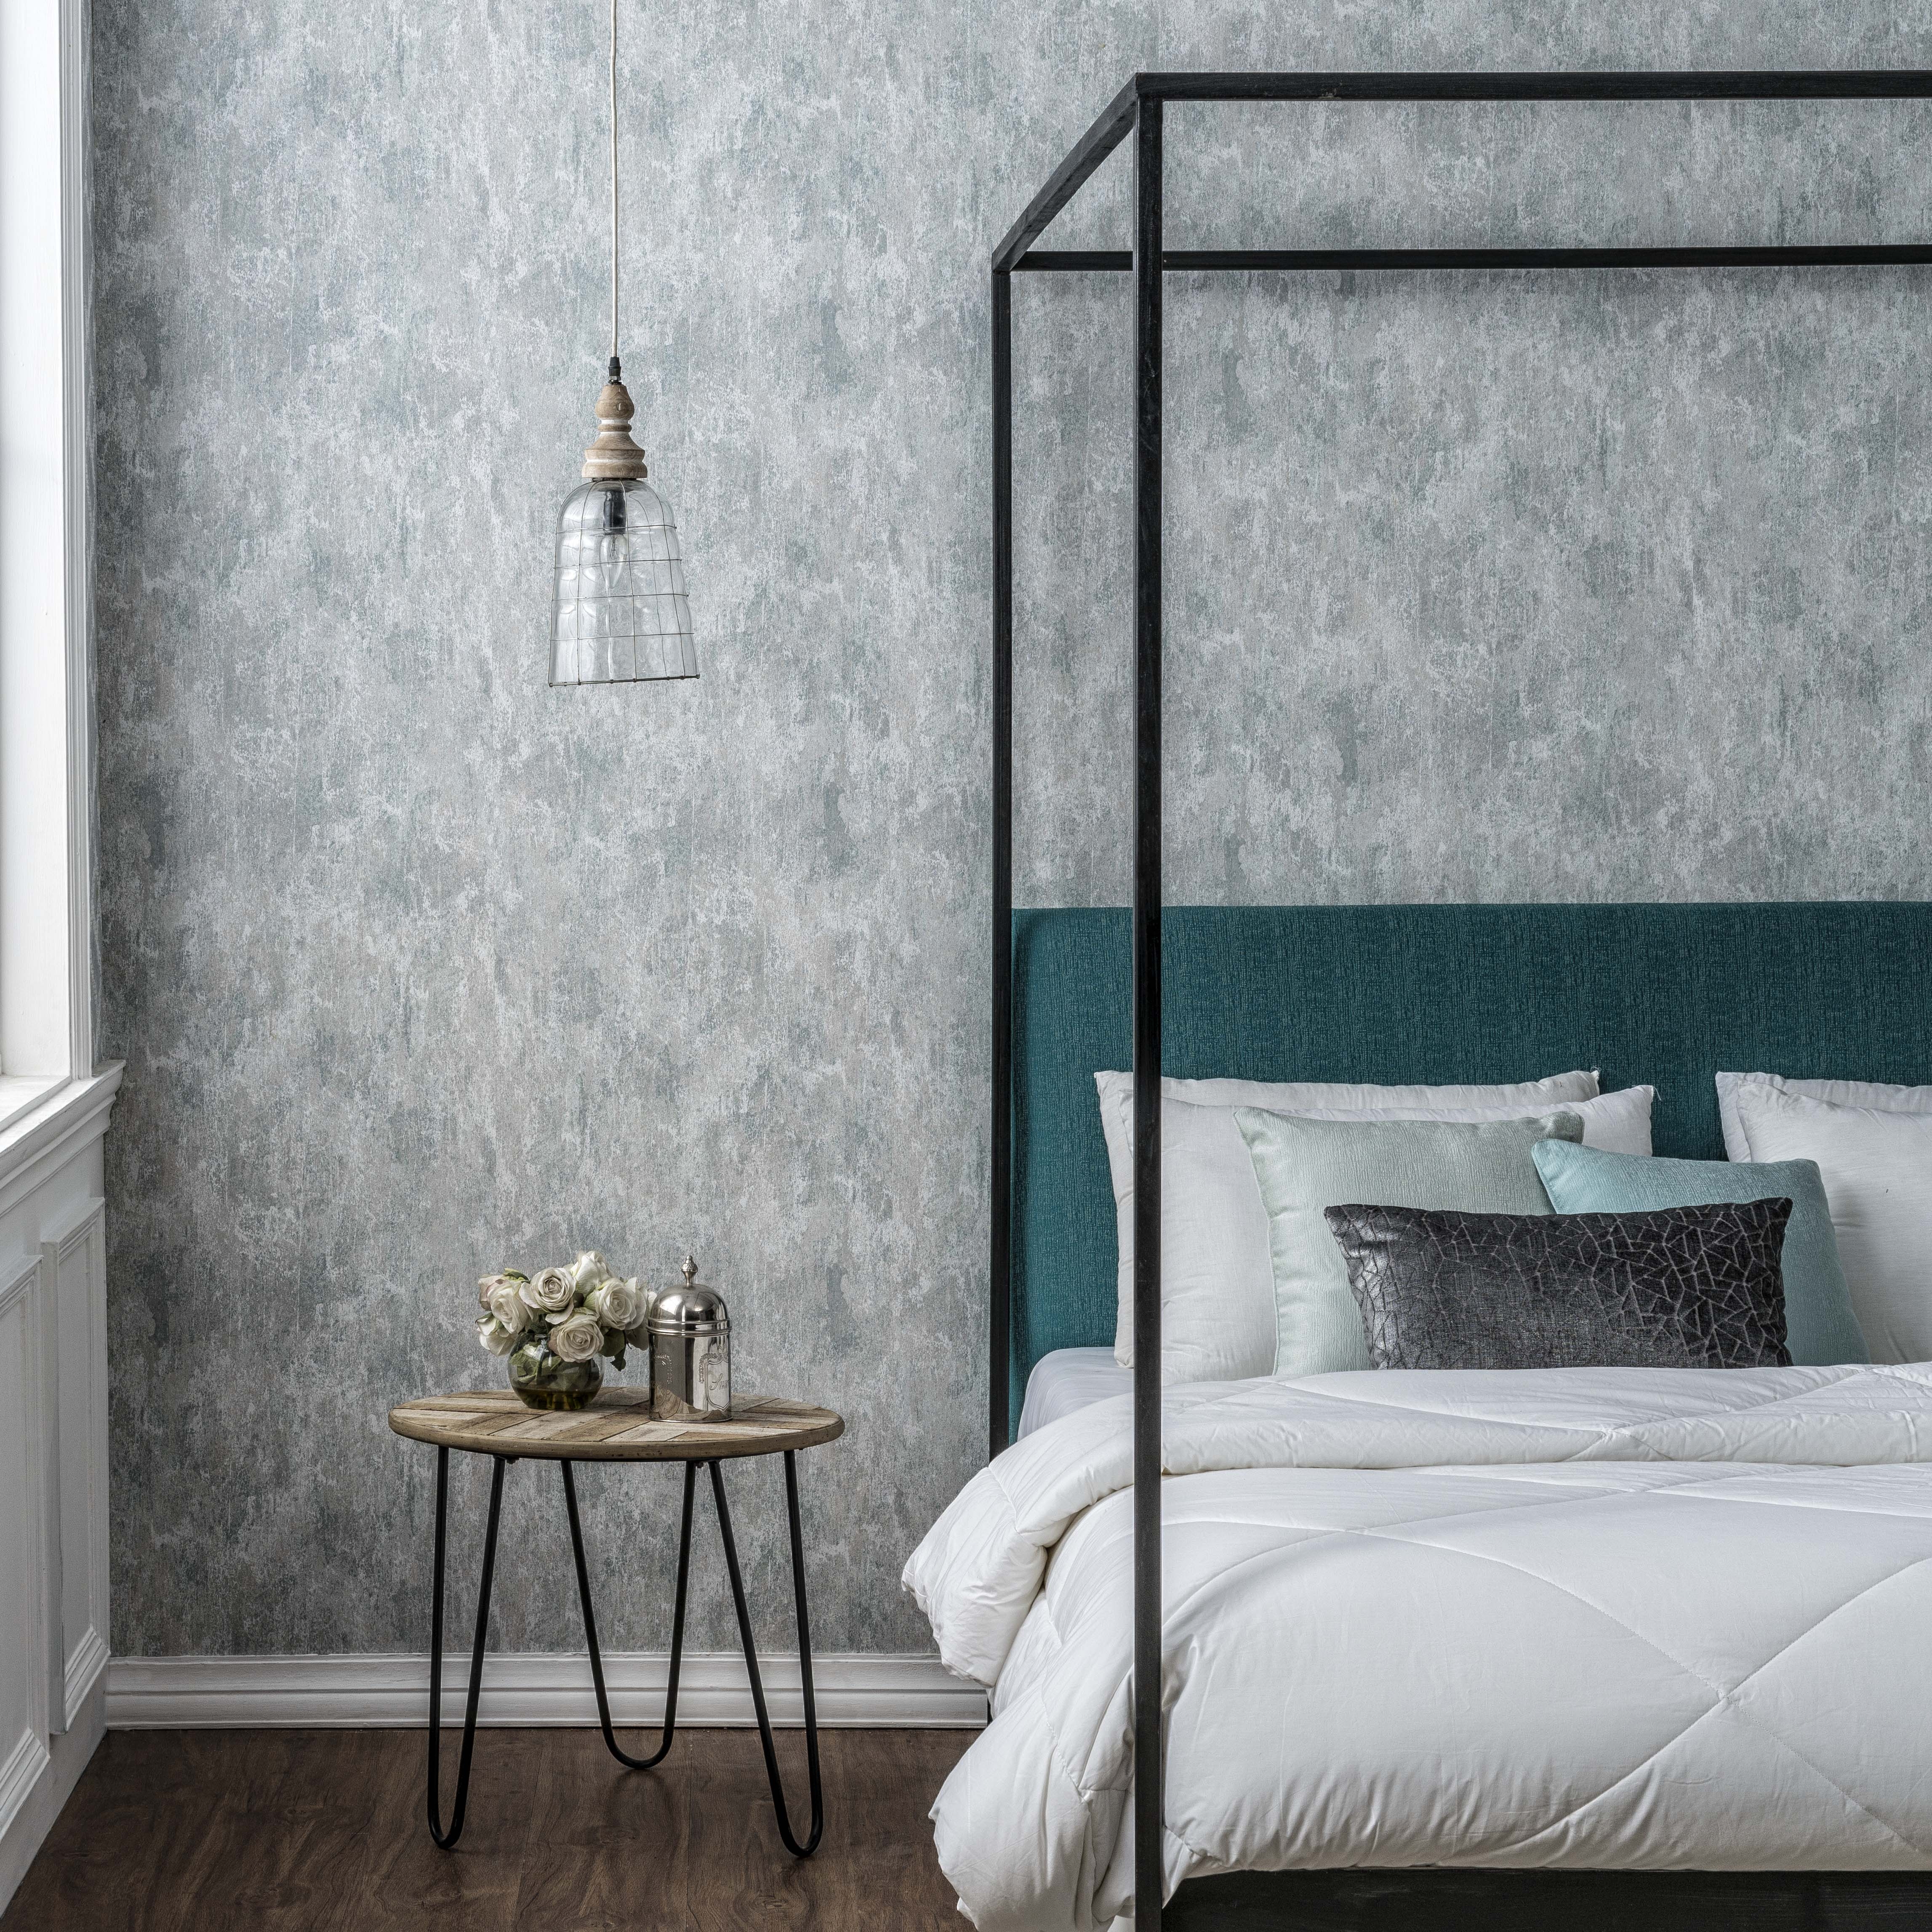 7 Ways Bedroom Wallpaper Can Transform The Space - Dolson Interiors